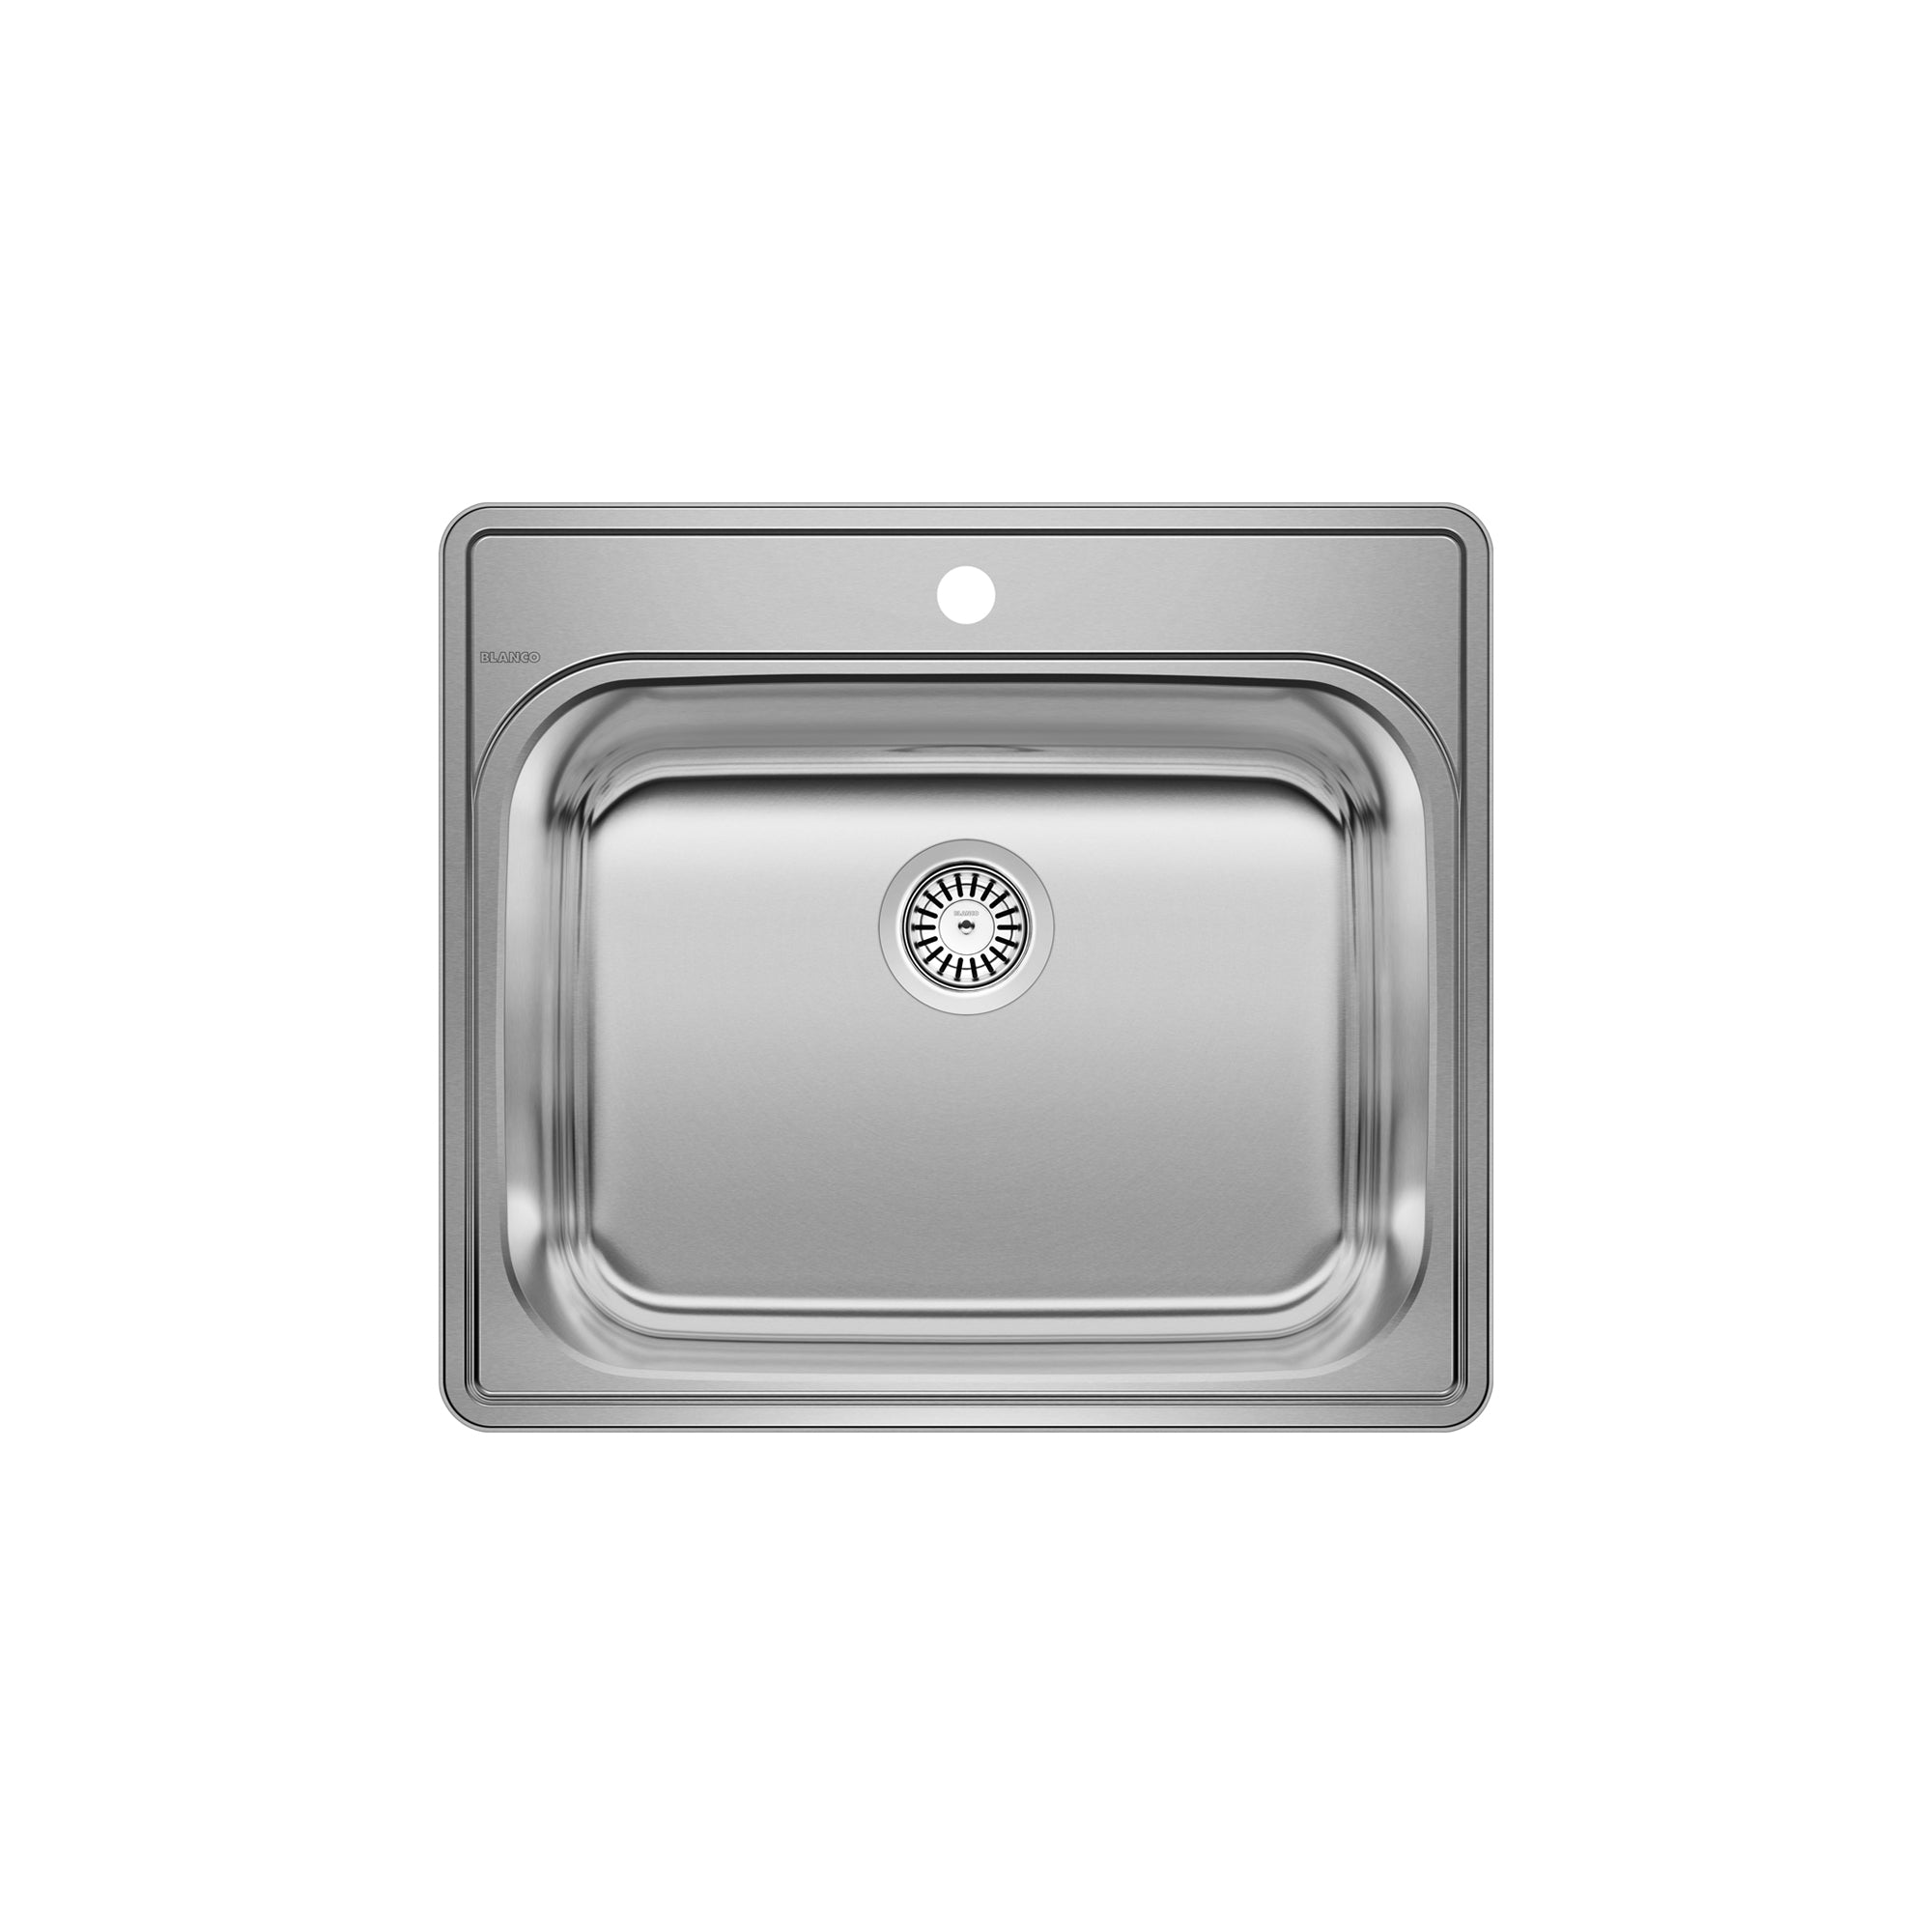 Blanco 401201- ESSENTIAL Drop-in Laundry Sink (1 Hole), Stainless Steel - FaucetExpress.ca